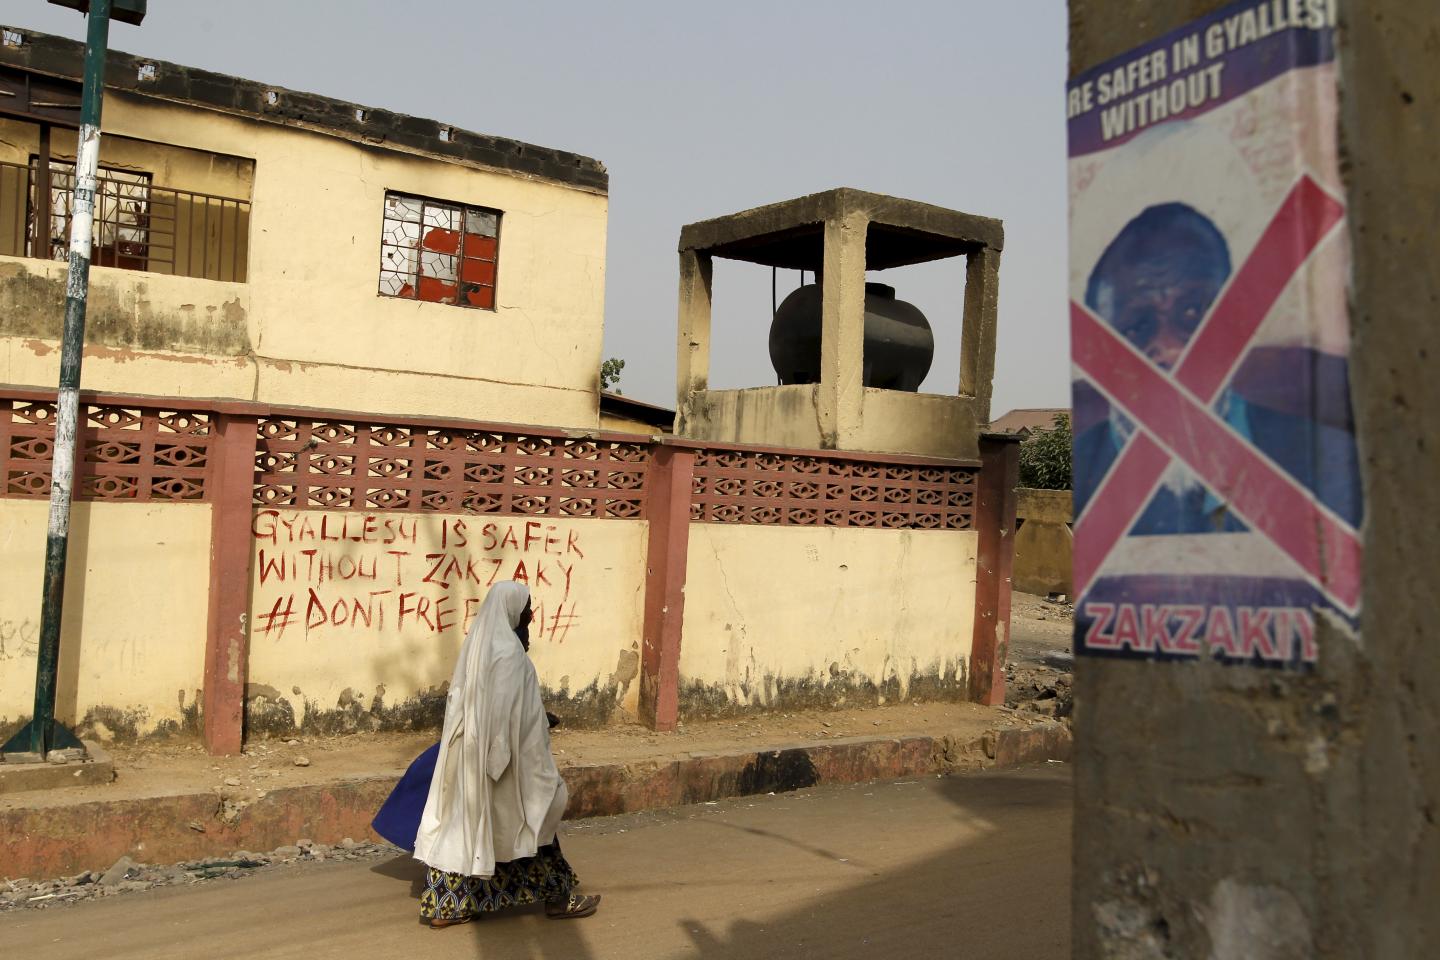 A woman walks past anti-Zakzaky graffiti in the Gyallesu district of Zaria, Nigeria, February 3. The clashes between Zakzaky's movement and the army have stoked tensions in northern Nigeria.